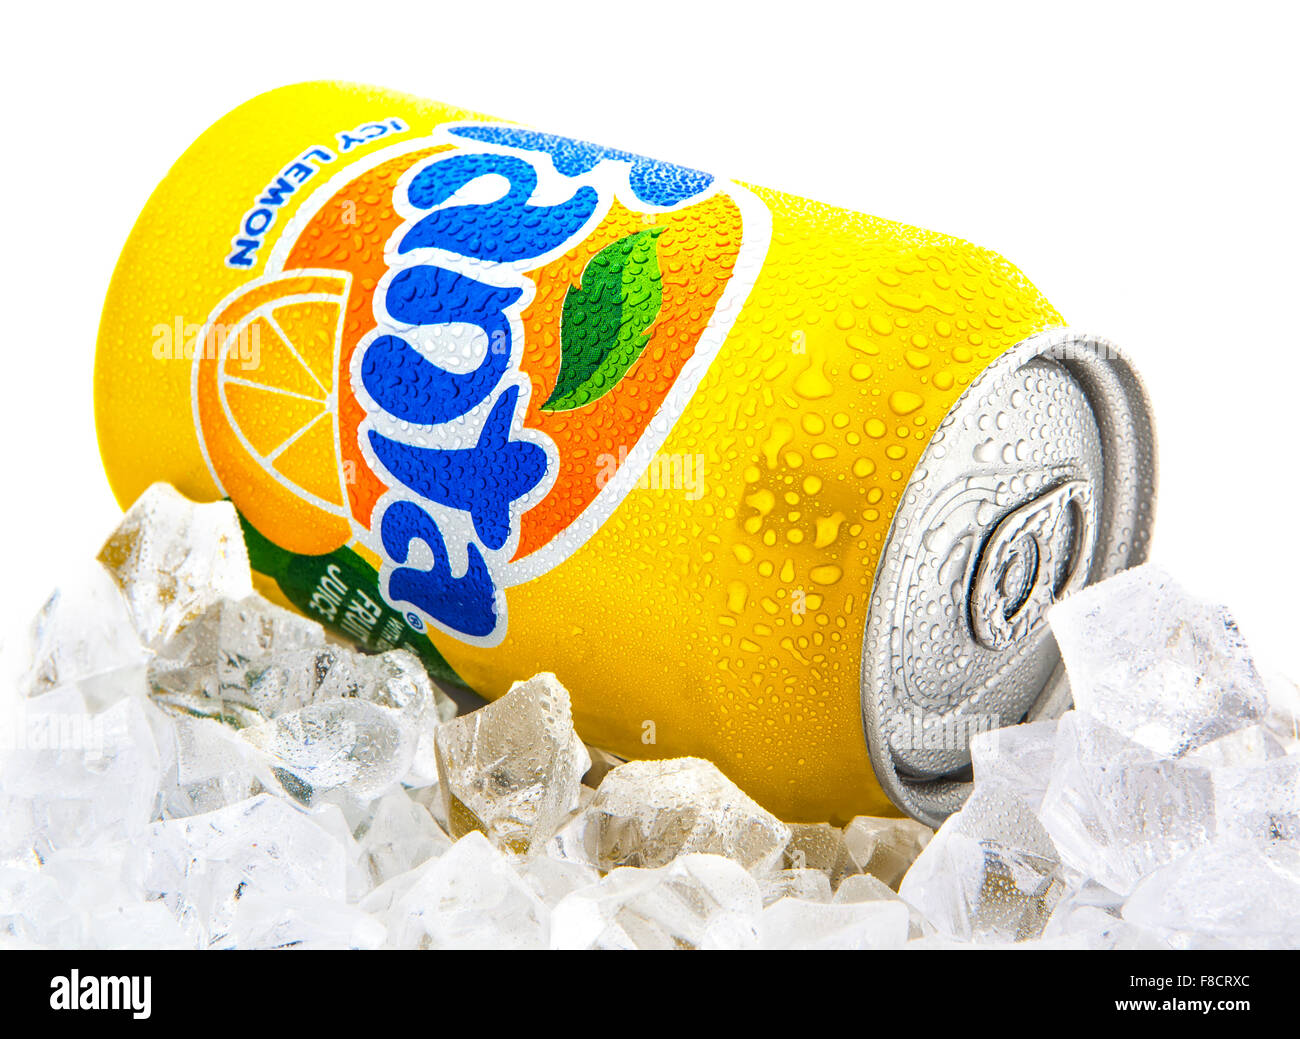 Fanta Icy Lemon on a bed of ice over white background Stock Photo